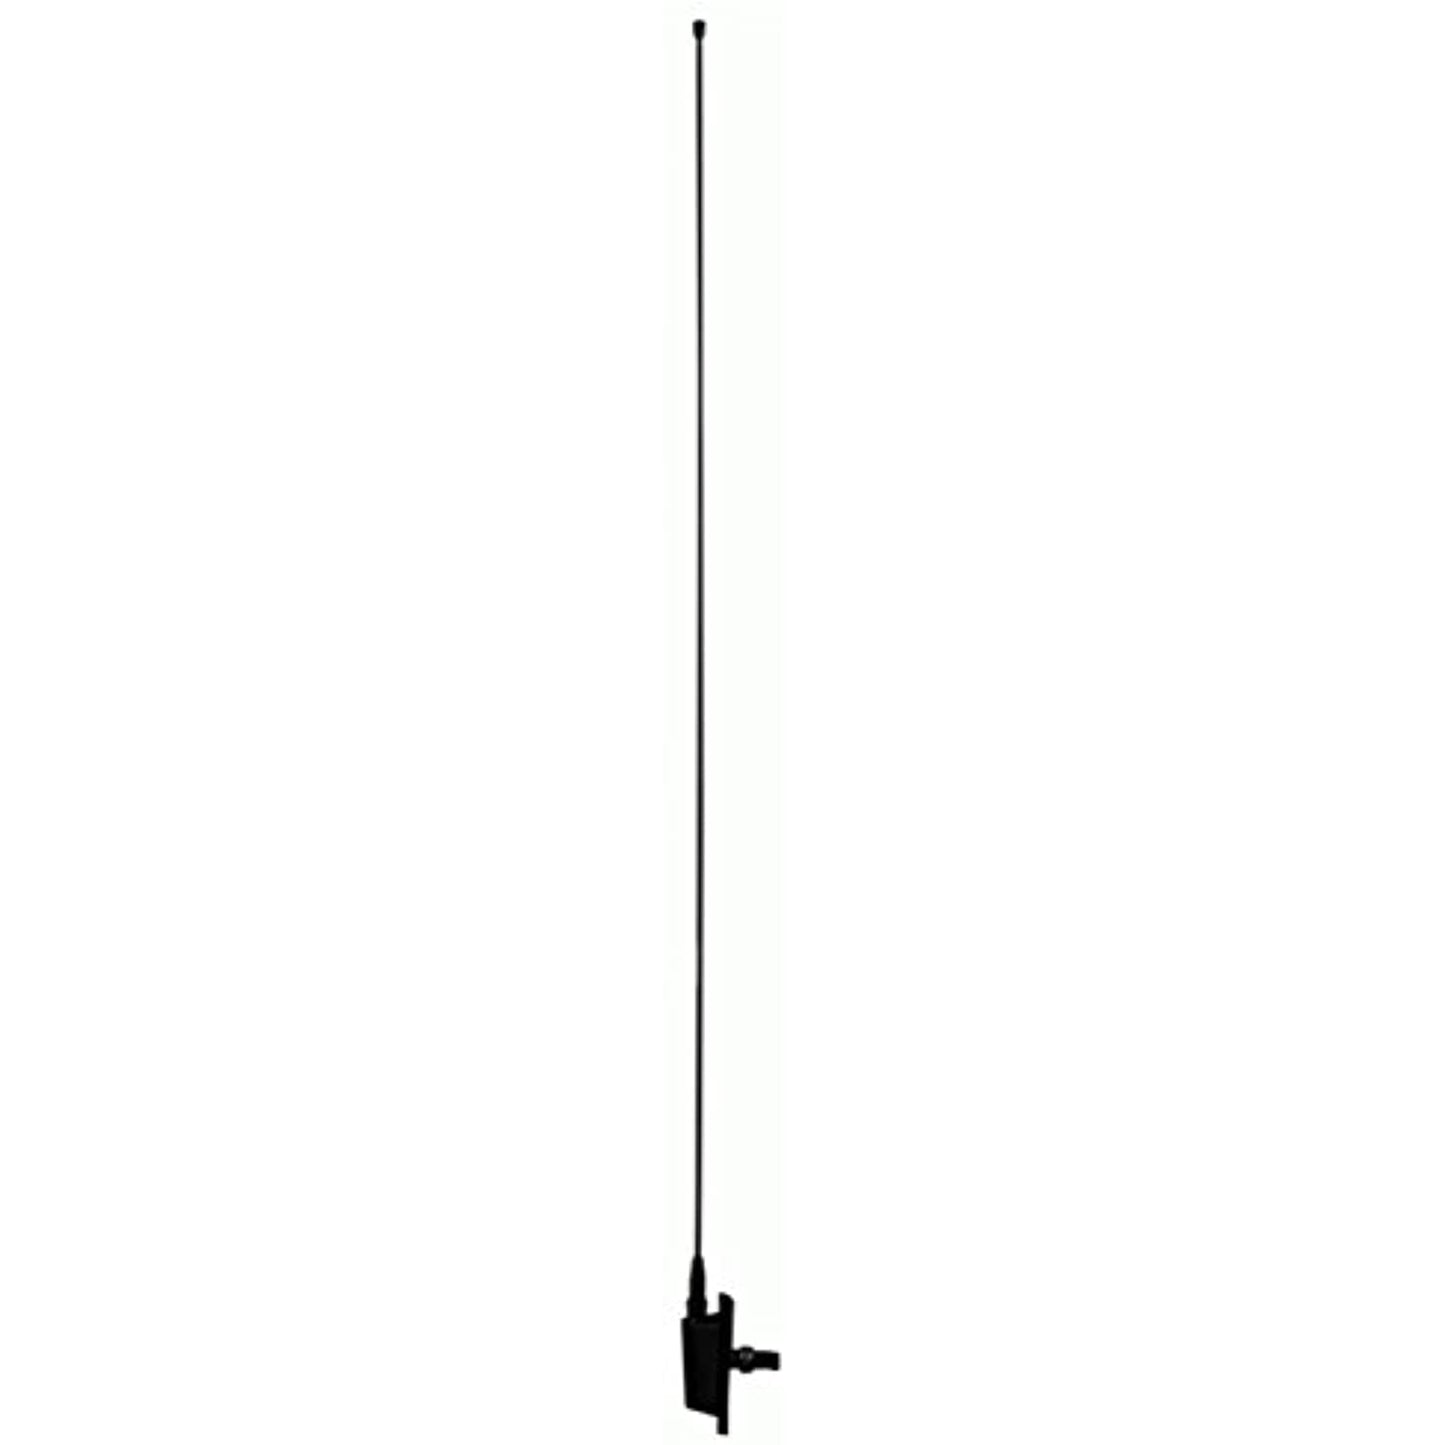 Metra 44-US51B Side Mount Triangle Shaped Base Replacement Antenna for AM/FM Bands (Black)